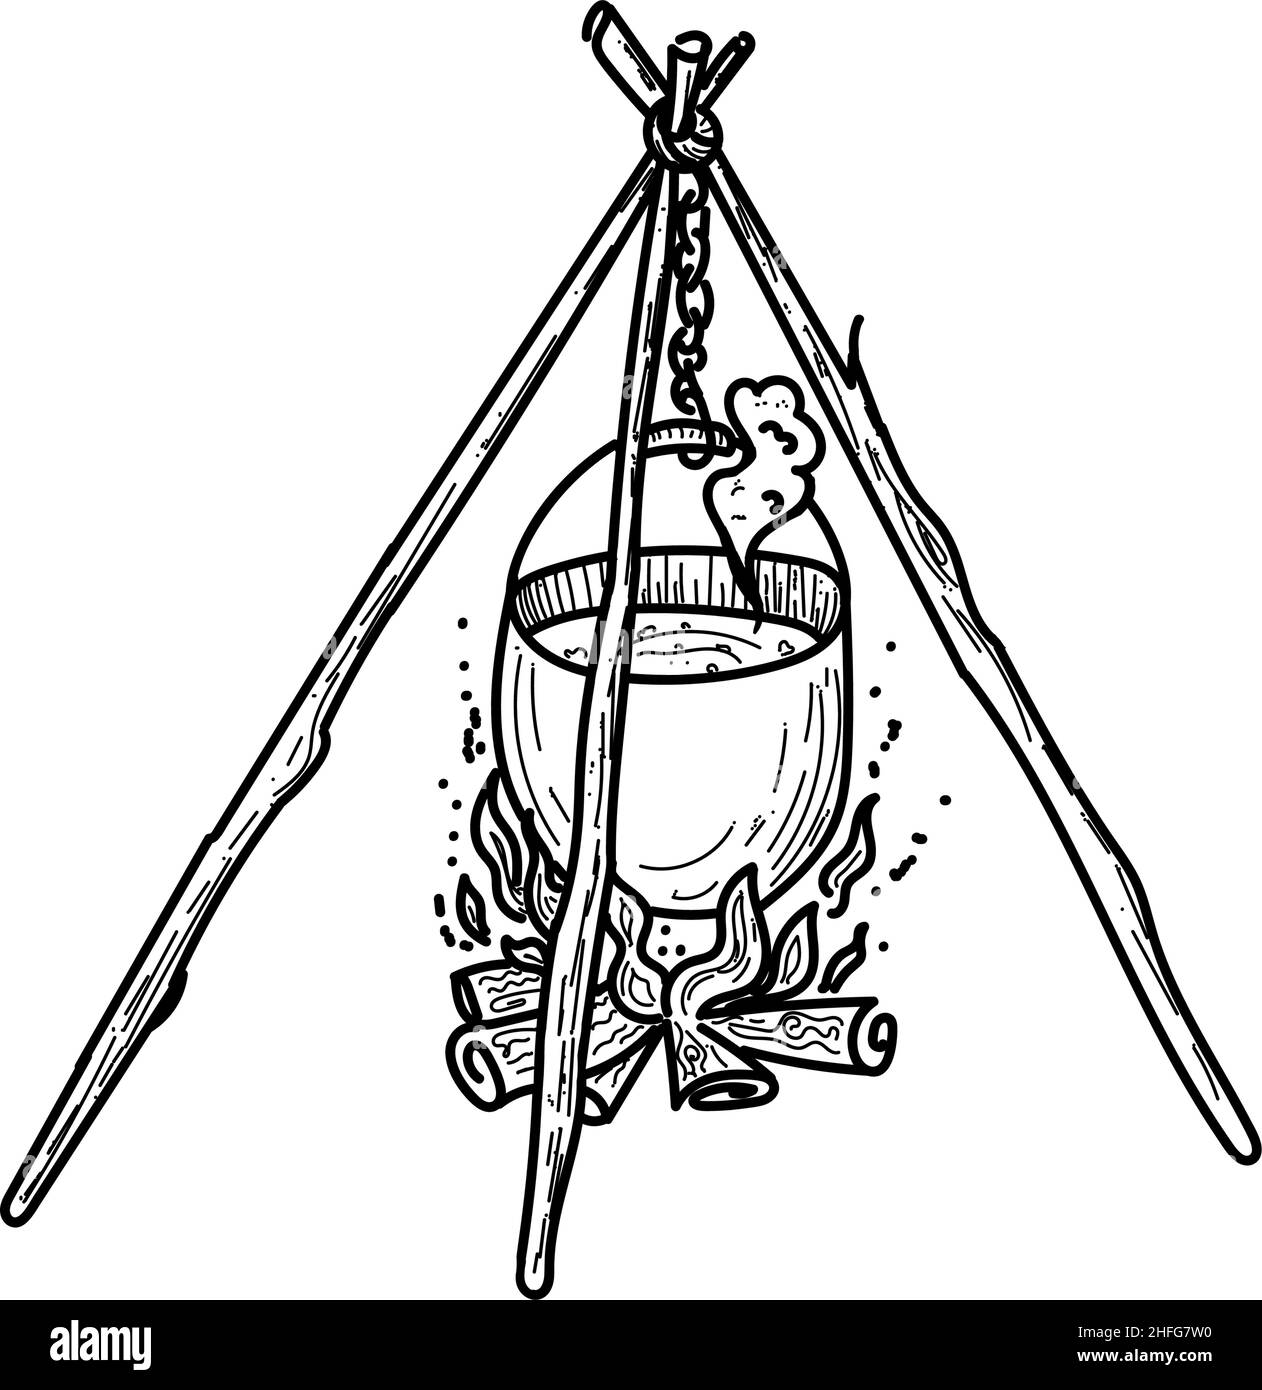 Doodle-style hanging bowler, hand-drawn. Illustration for local tourism. Cauldron with food for campers. Campfire with firewood. Camping or camping it Stock Vector